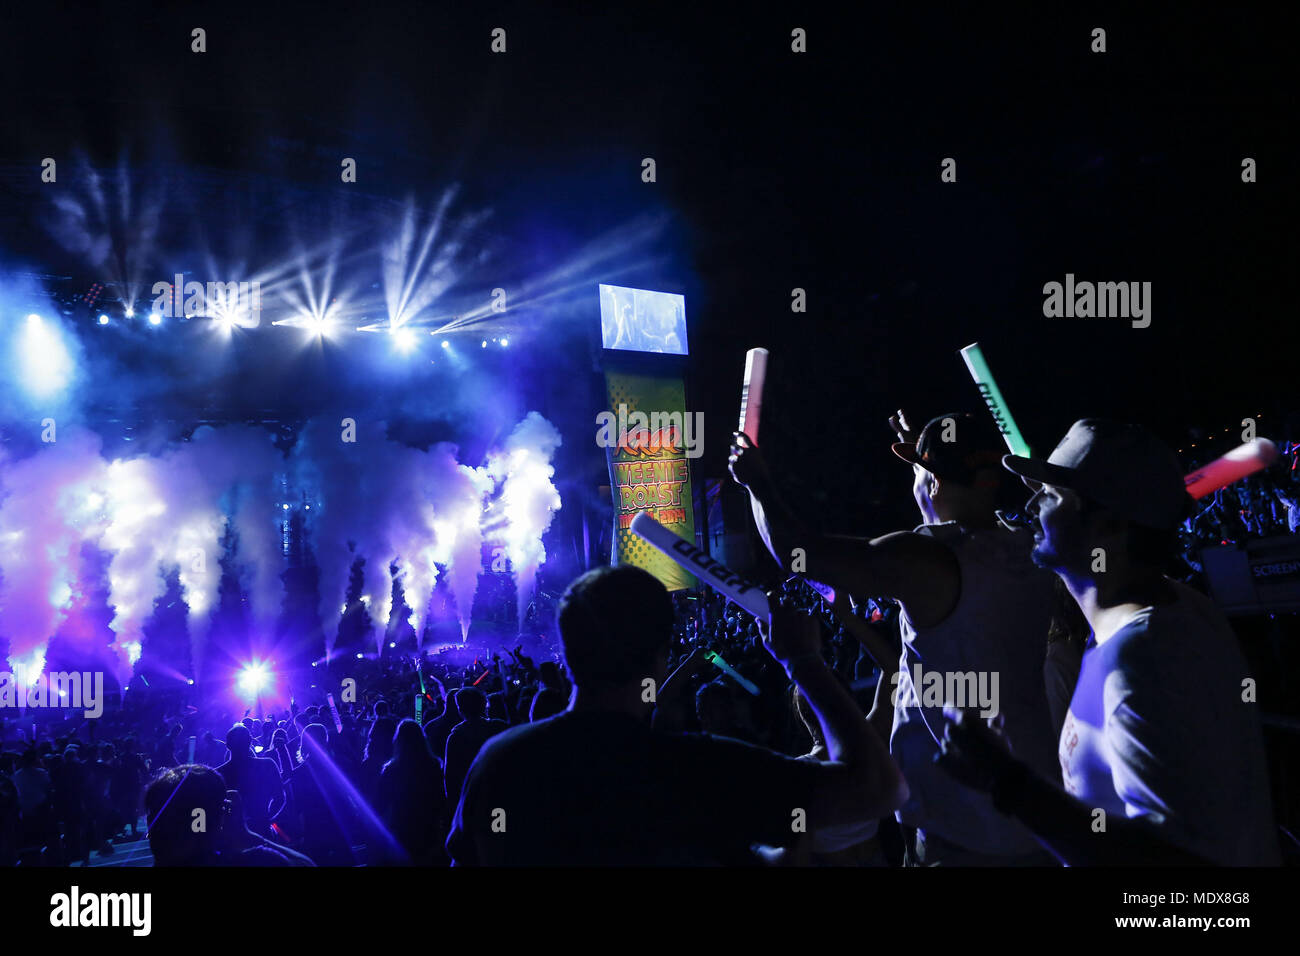 Irvine, CA, USA. 31st May, 2014. Fans dance with glow sticks as Swedish musician, DJ, remixer and record producer TIM BERGLING, better known by his stage name Avicii, performs during the KROQ Weenie Roast at the Verizon Wireless Amphitheater on Saturday, May 31, 2014 in Irvine, Calif. © 2014 Patrick T. Fallon Credit: Patrick Fallon/ZUMA Wire/Alamy Live News Stock Photo